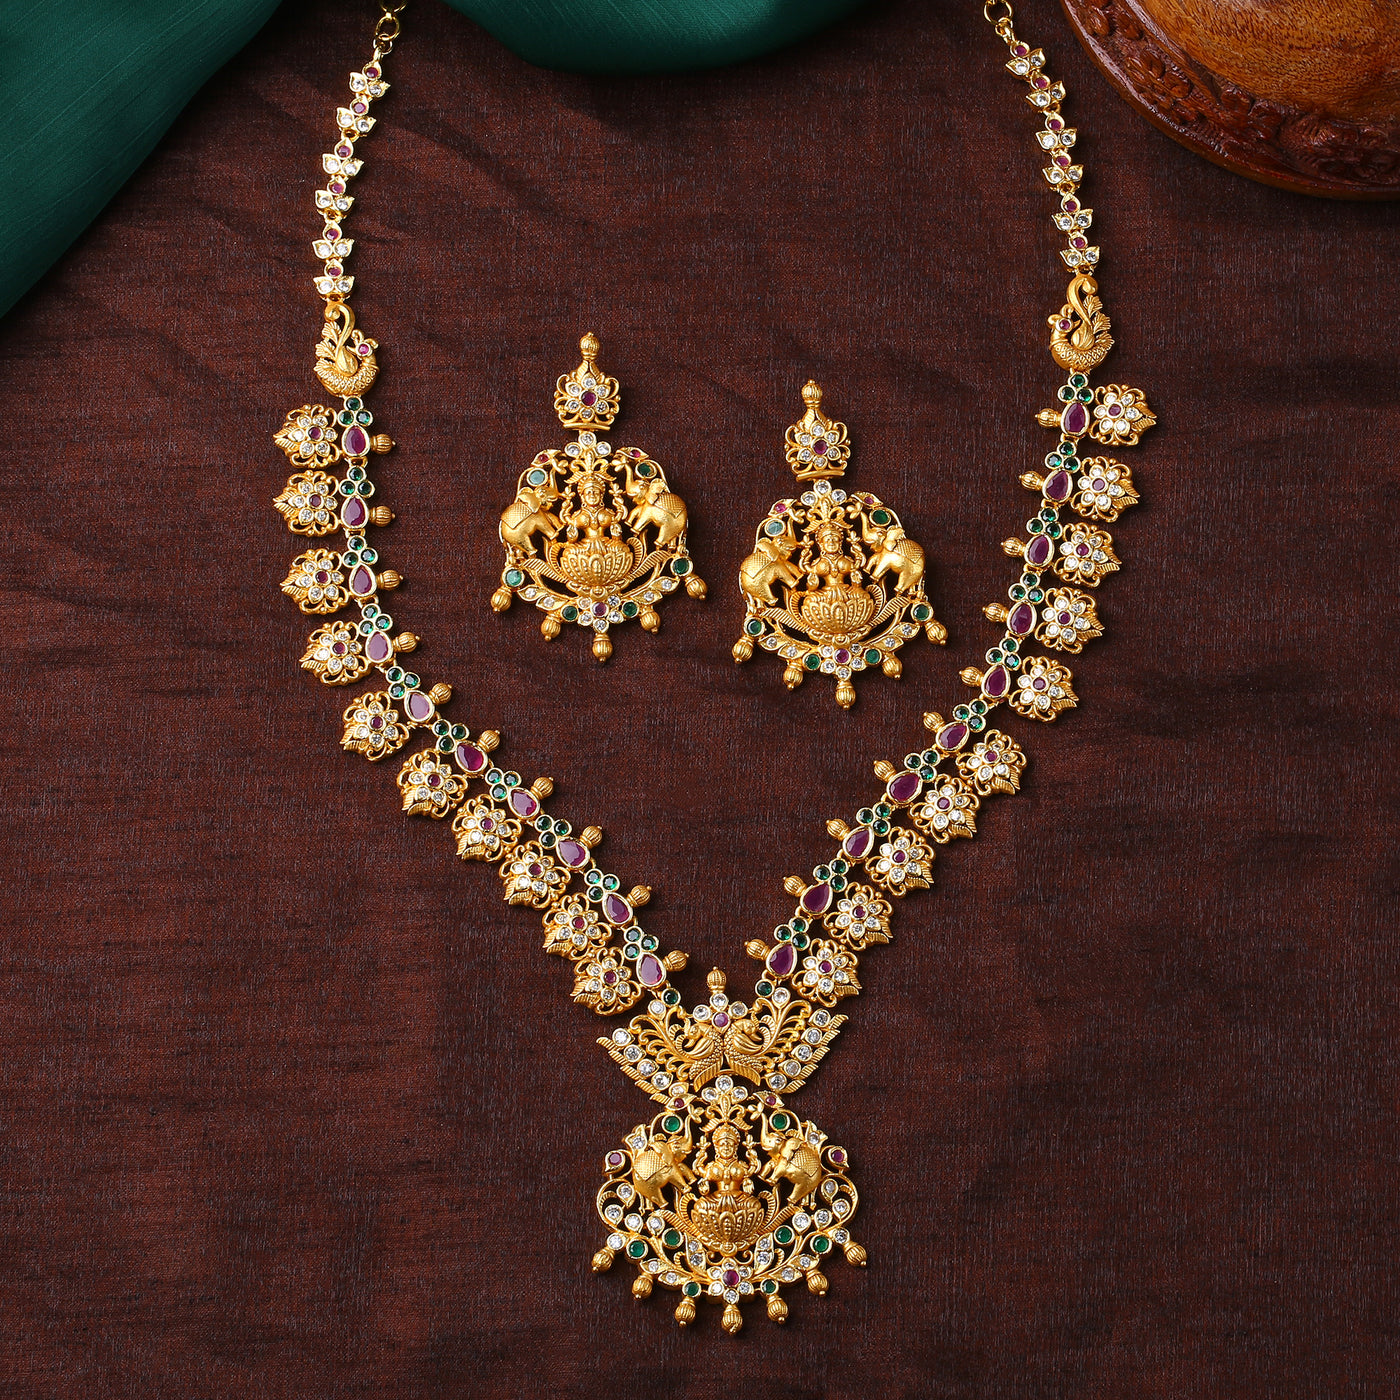 Estele Gold Plated CZ Traditional Laxmi Ji Decorated Bridal Long Necklace Set Combo with Color Stones